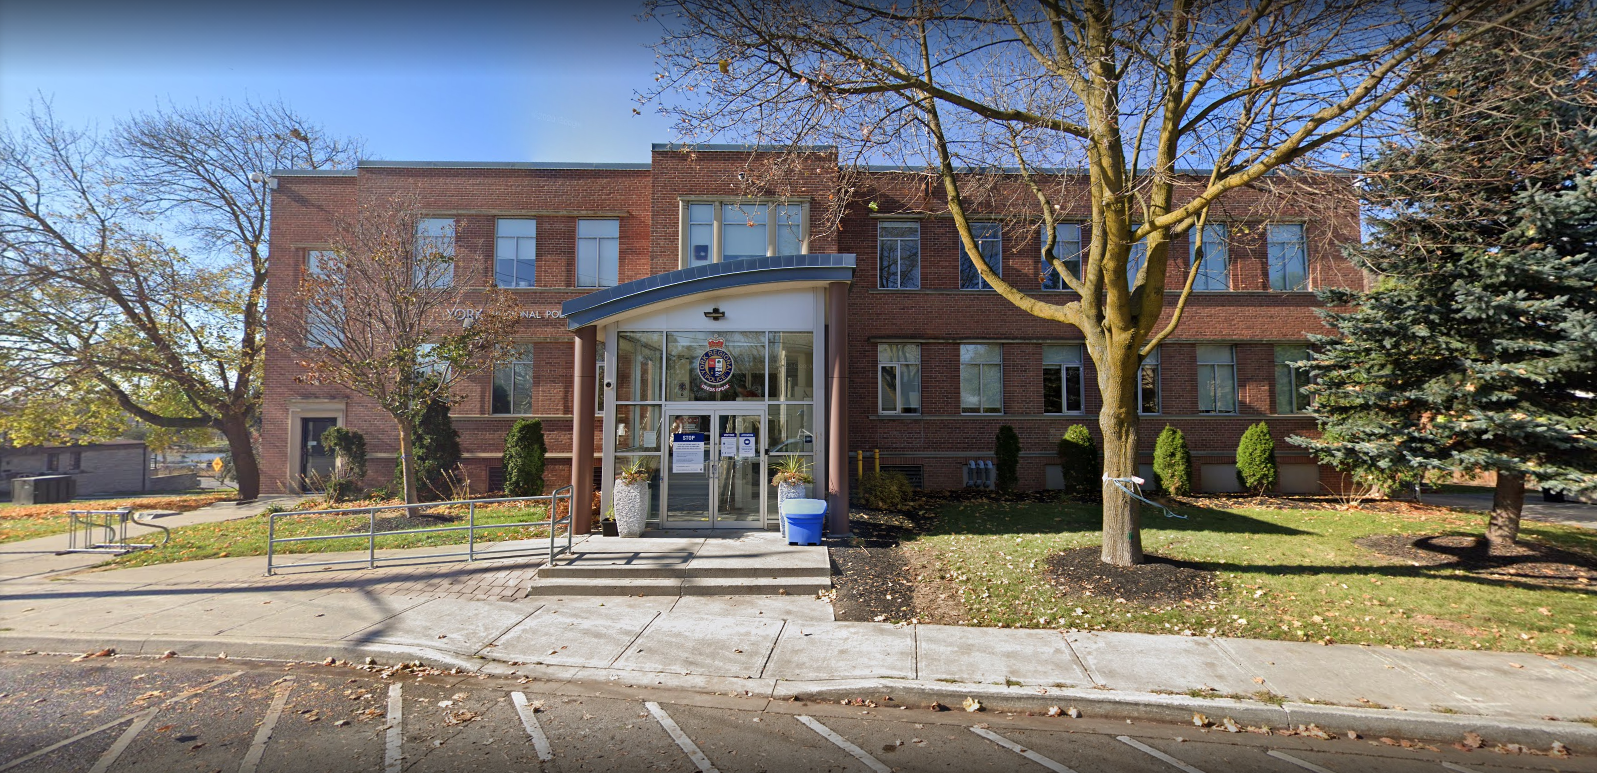 York Regional Police, 240 Prospect St, Newmarket, ON L3Y 3T9, Canada